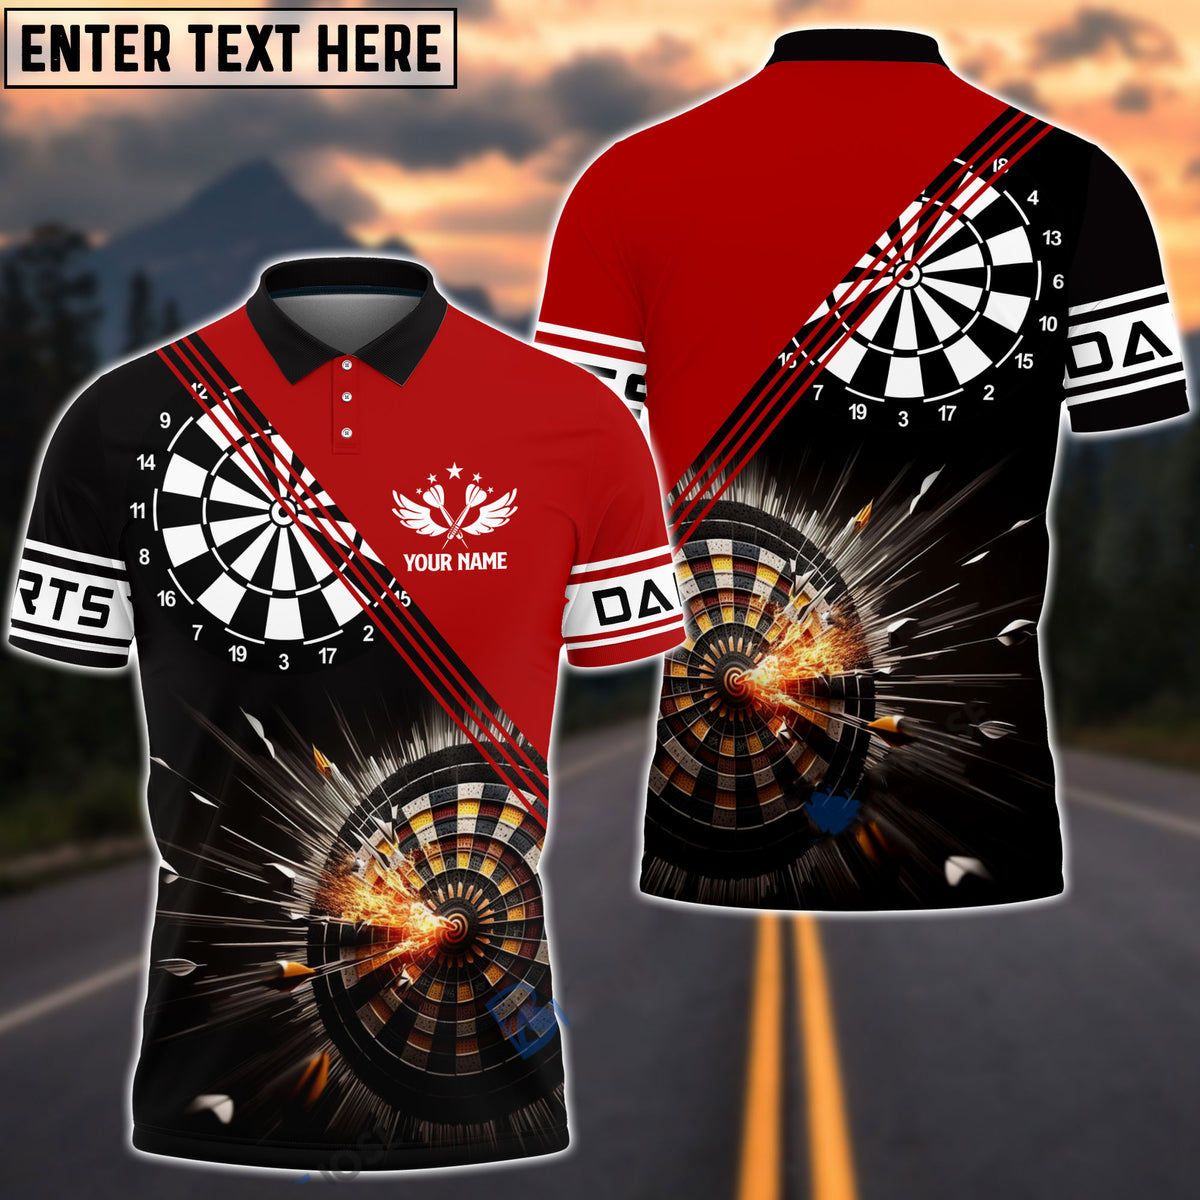 Coolspod Red Darts Personalized Name 3D Polo Shirt/ Dartboard Pattern Shirt/ Gift for Dart Lovers